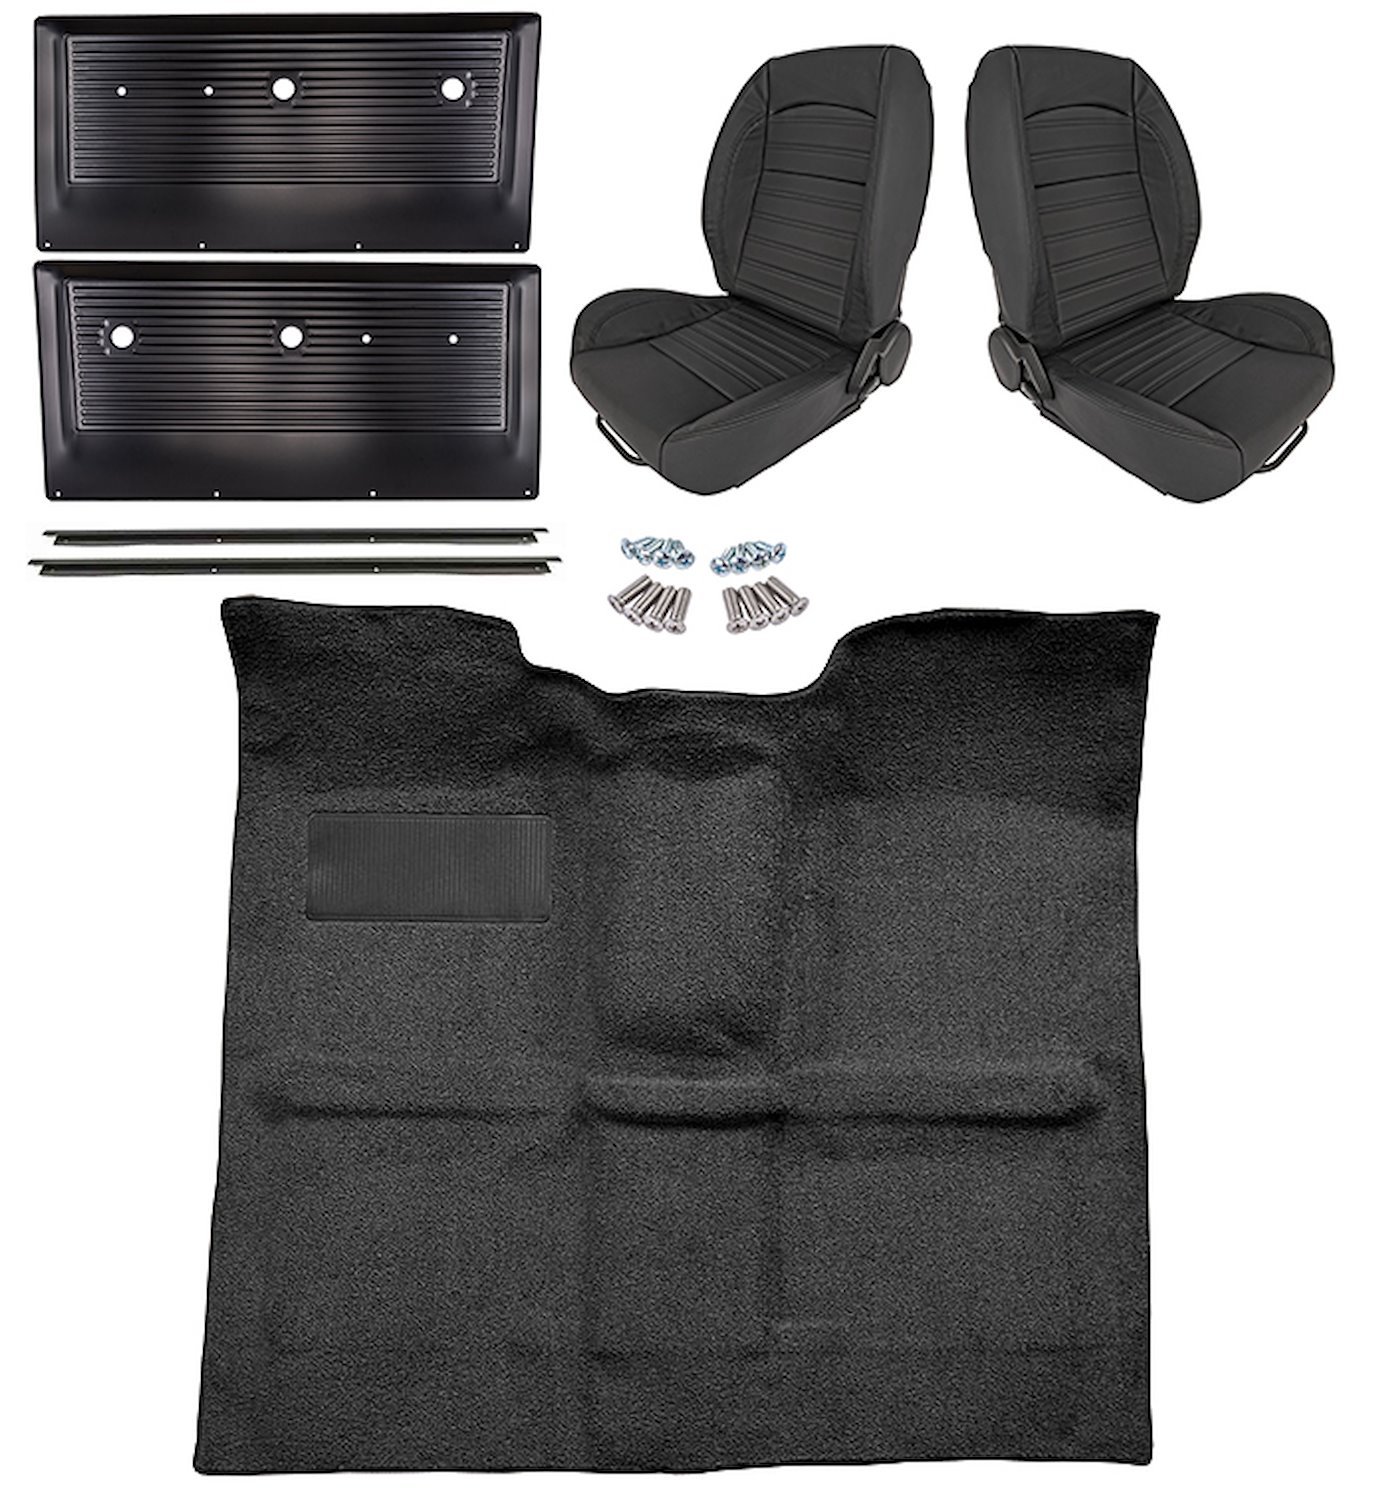 Black Interior Kit w/Low-Back Buckets for 1967-1972 GM C Series Regular Cab Truck w/o Gas Tank in Cab, TH400